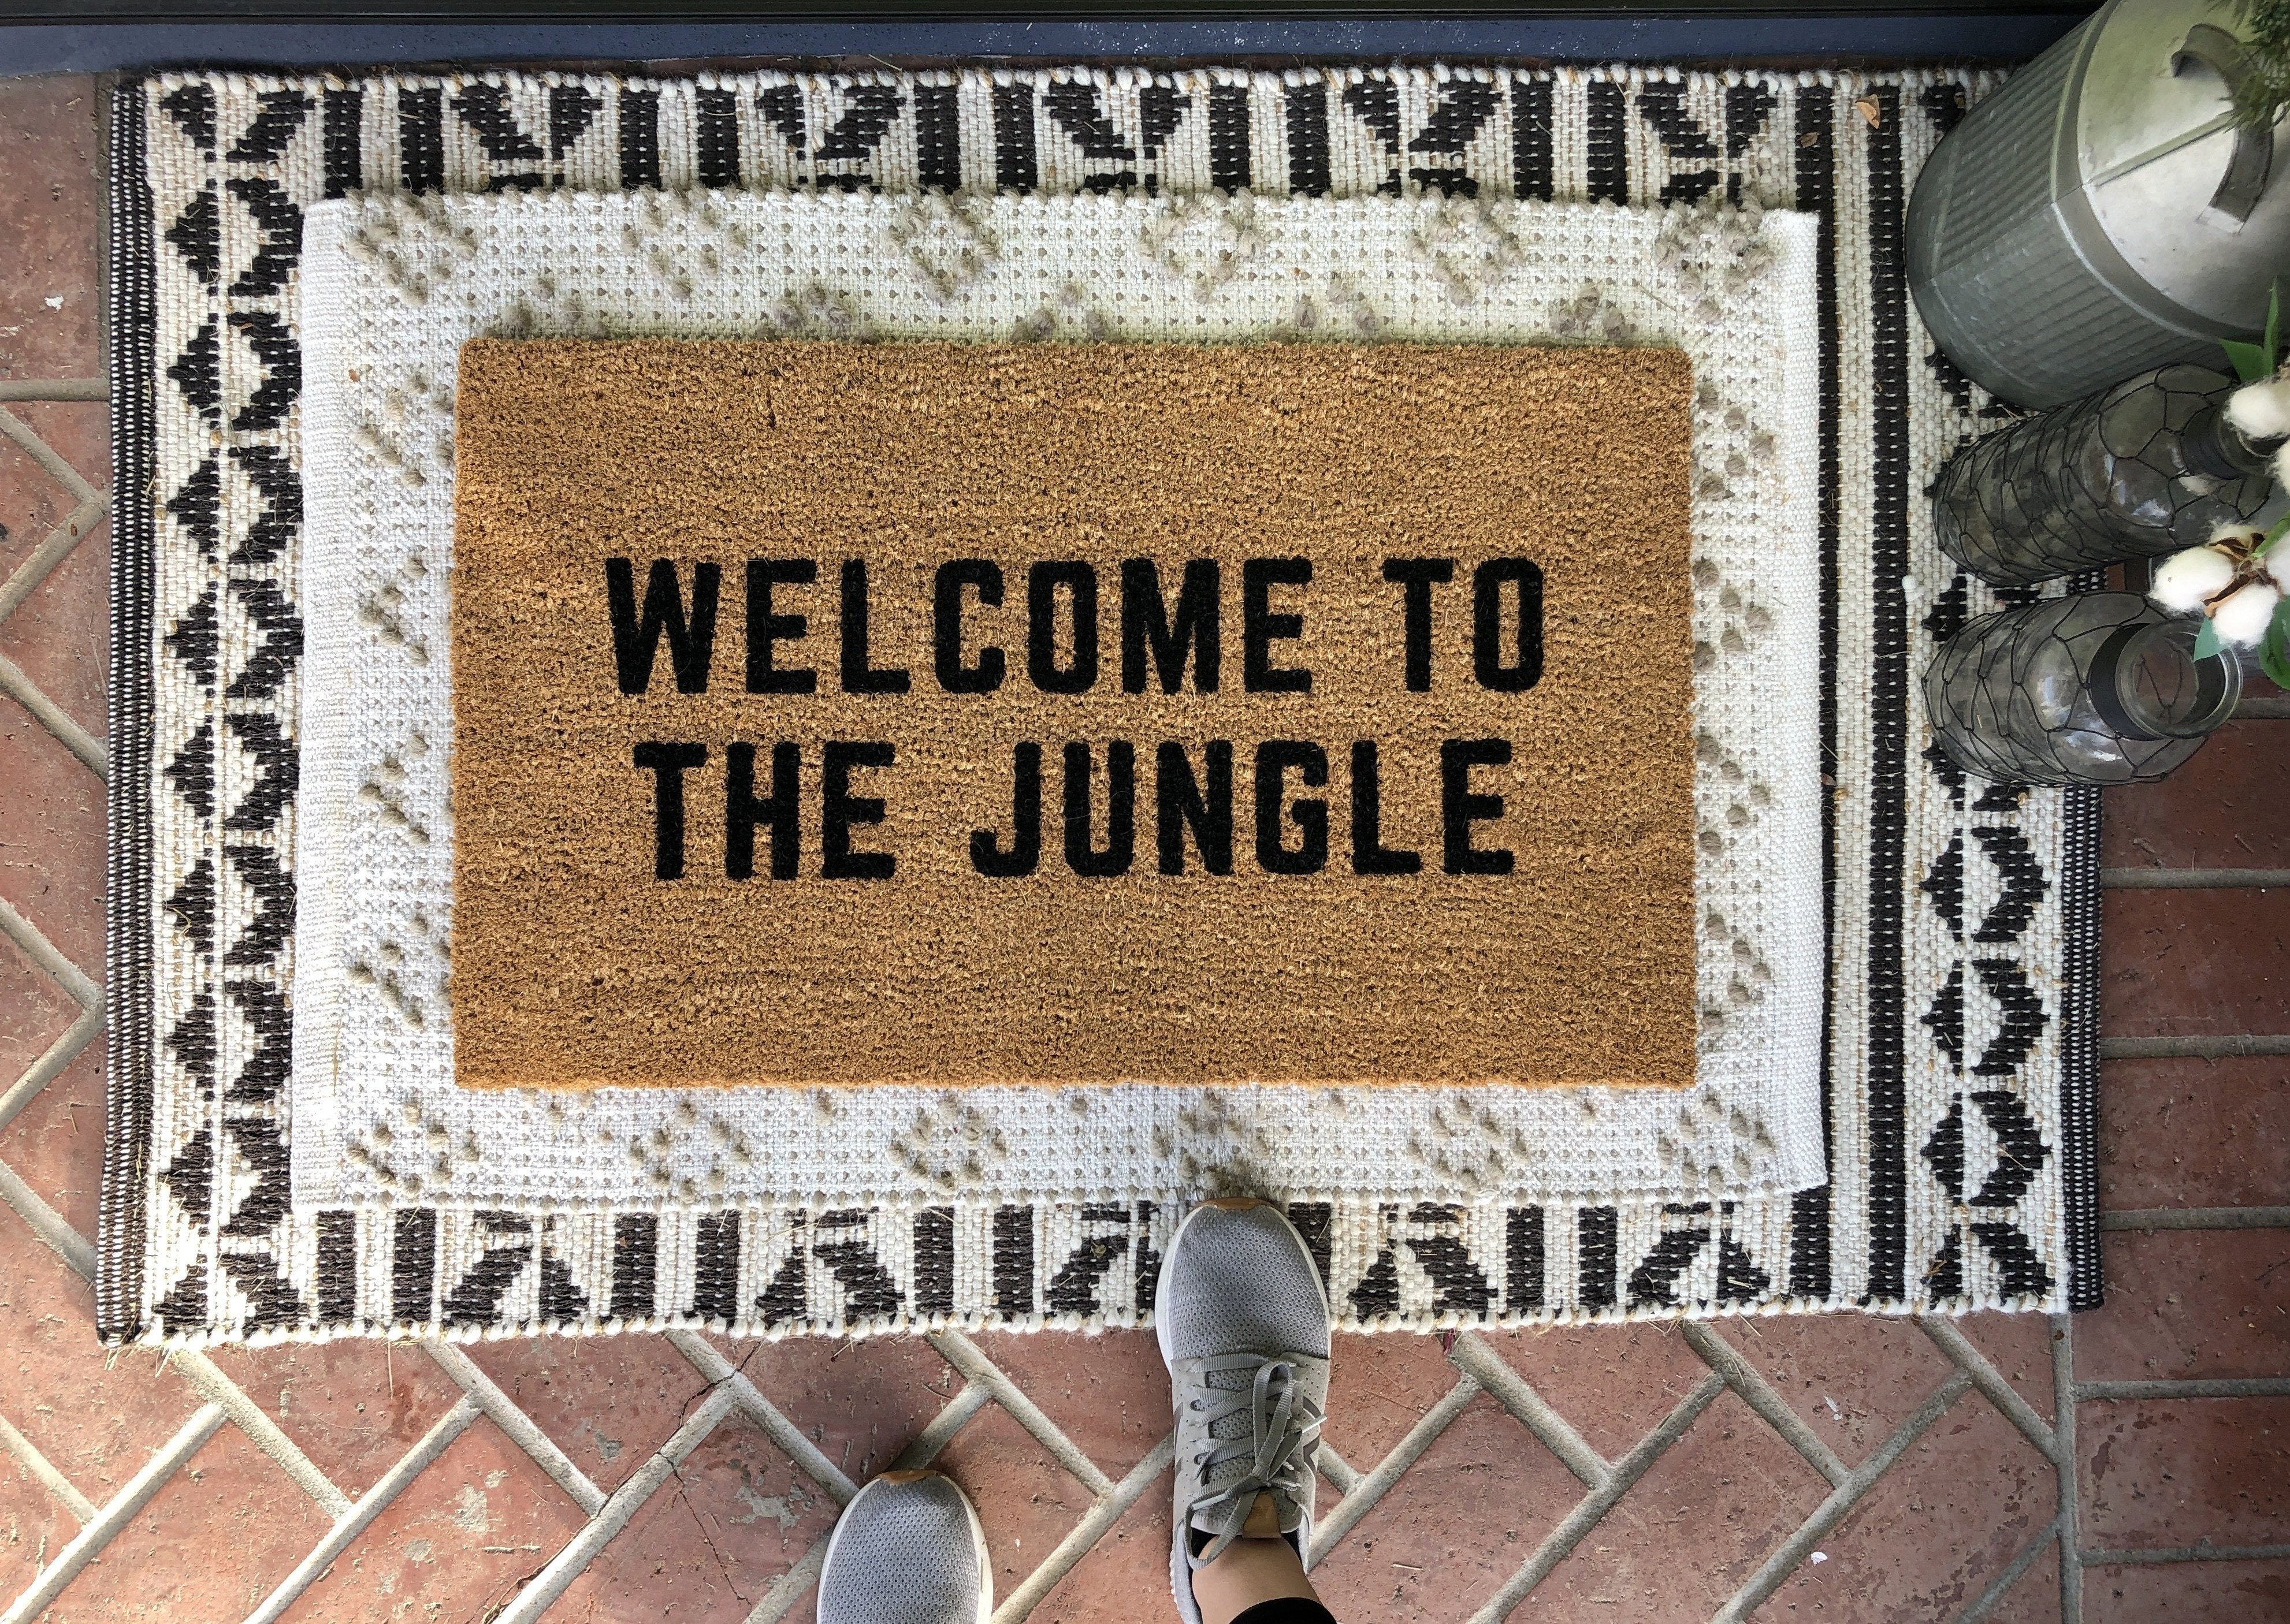 Mini Playhouse Doormat, Let's Play Welcome Mat, 24 Inch Small